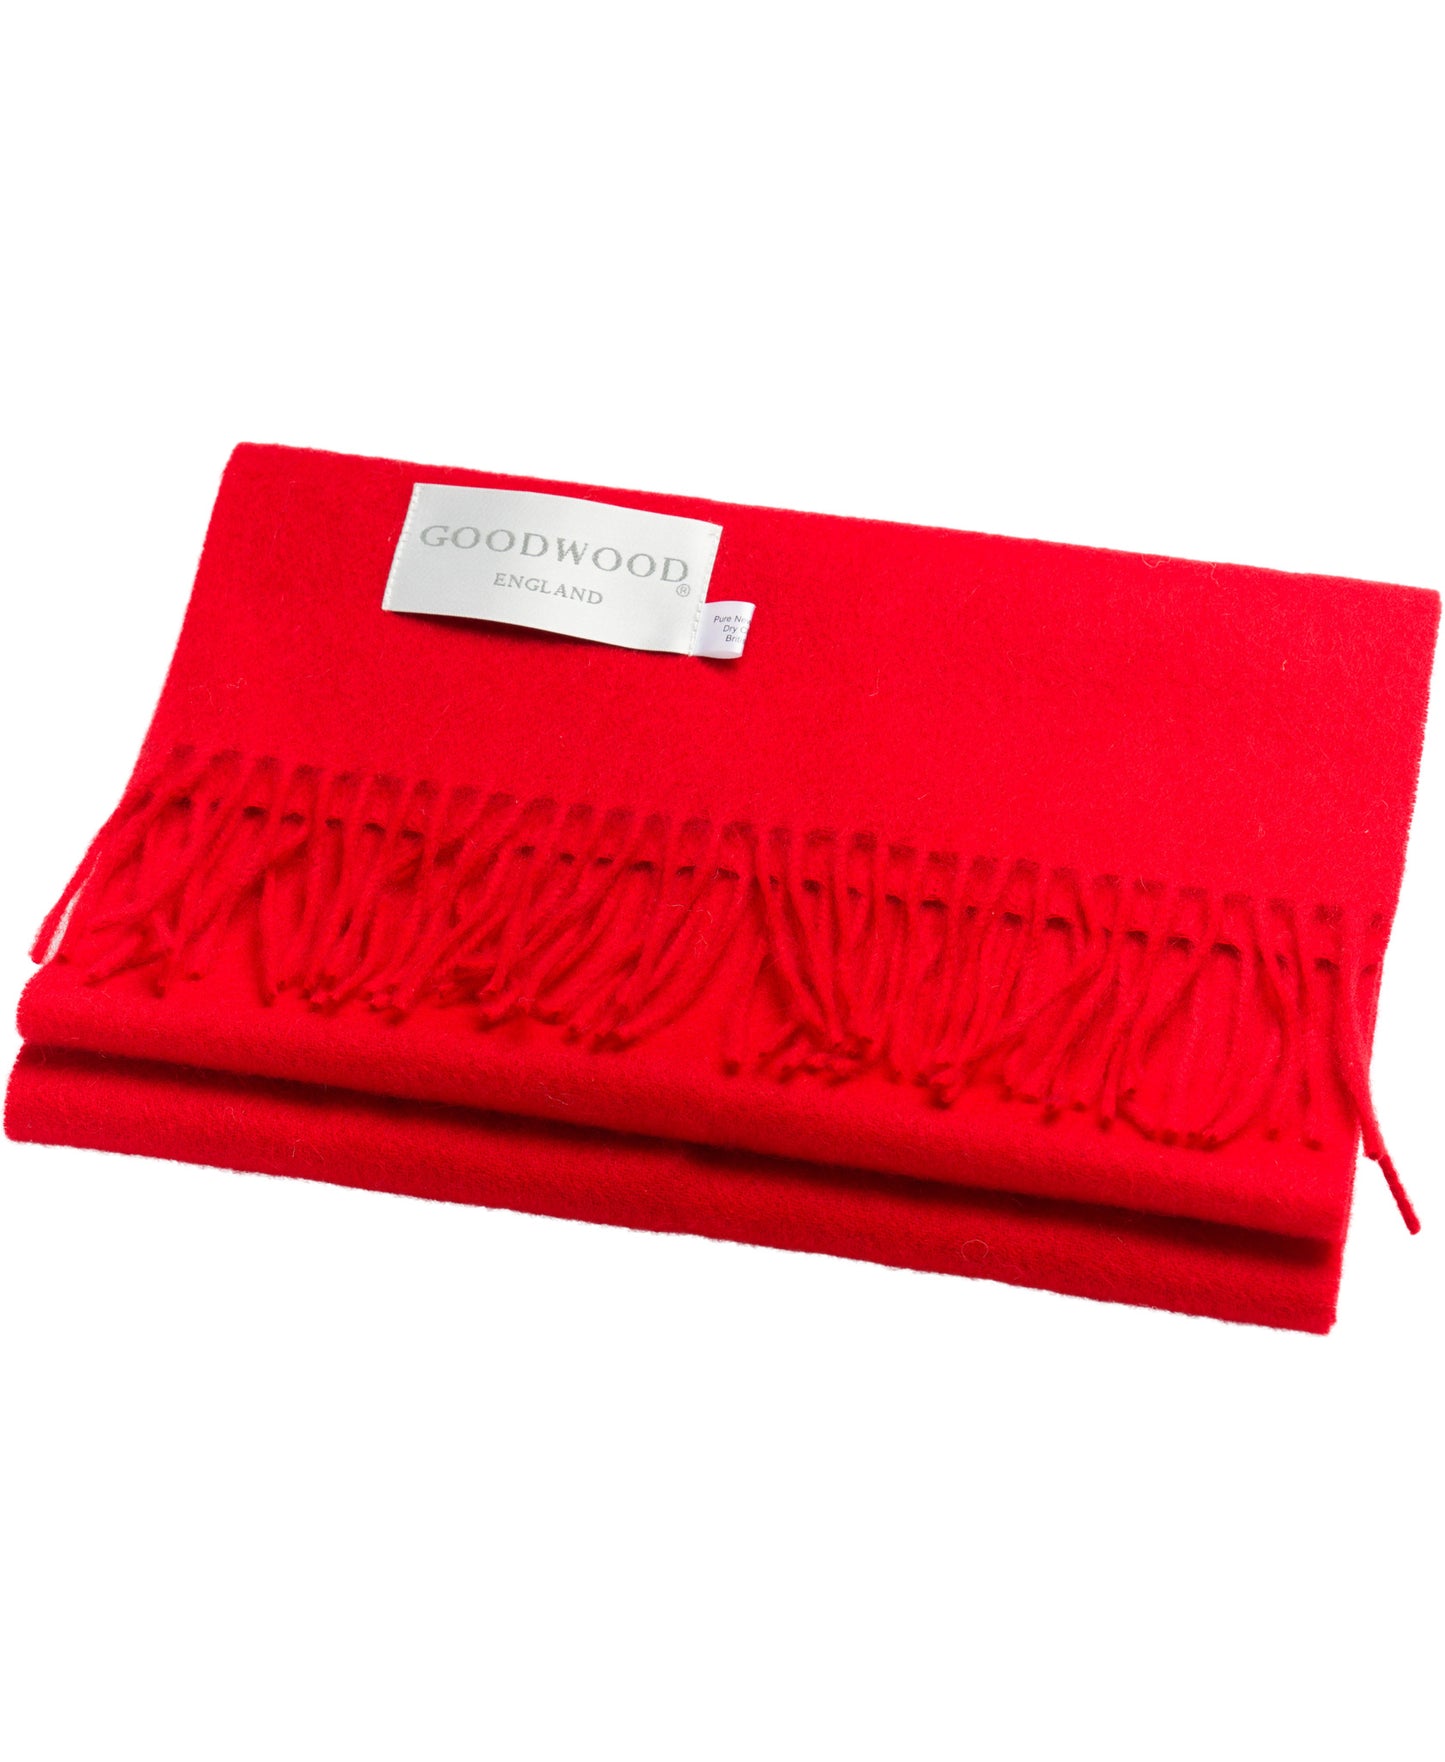 Goodwood Lambswool Scarf Red